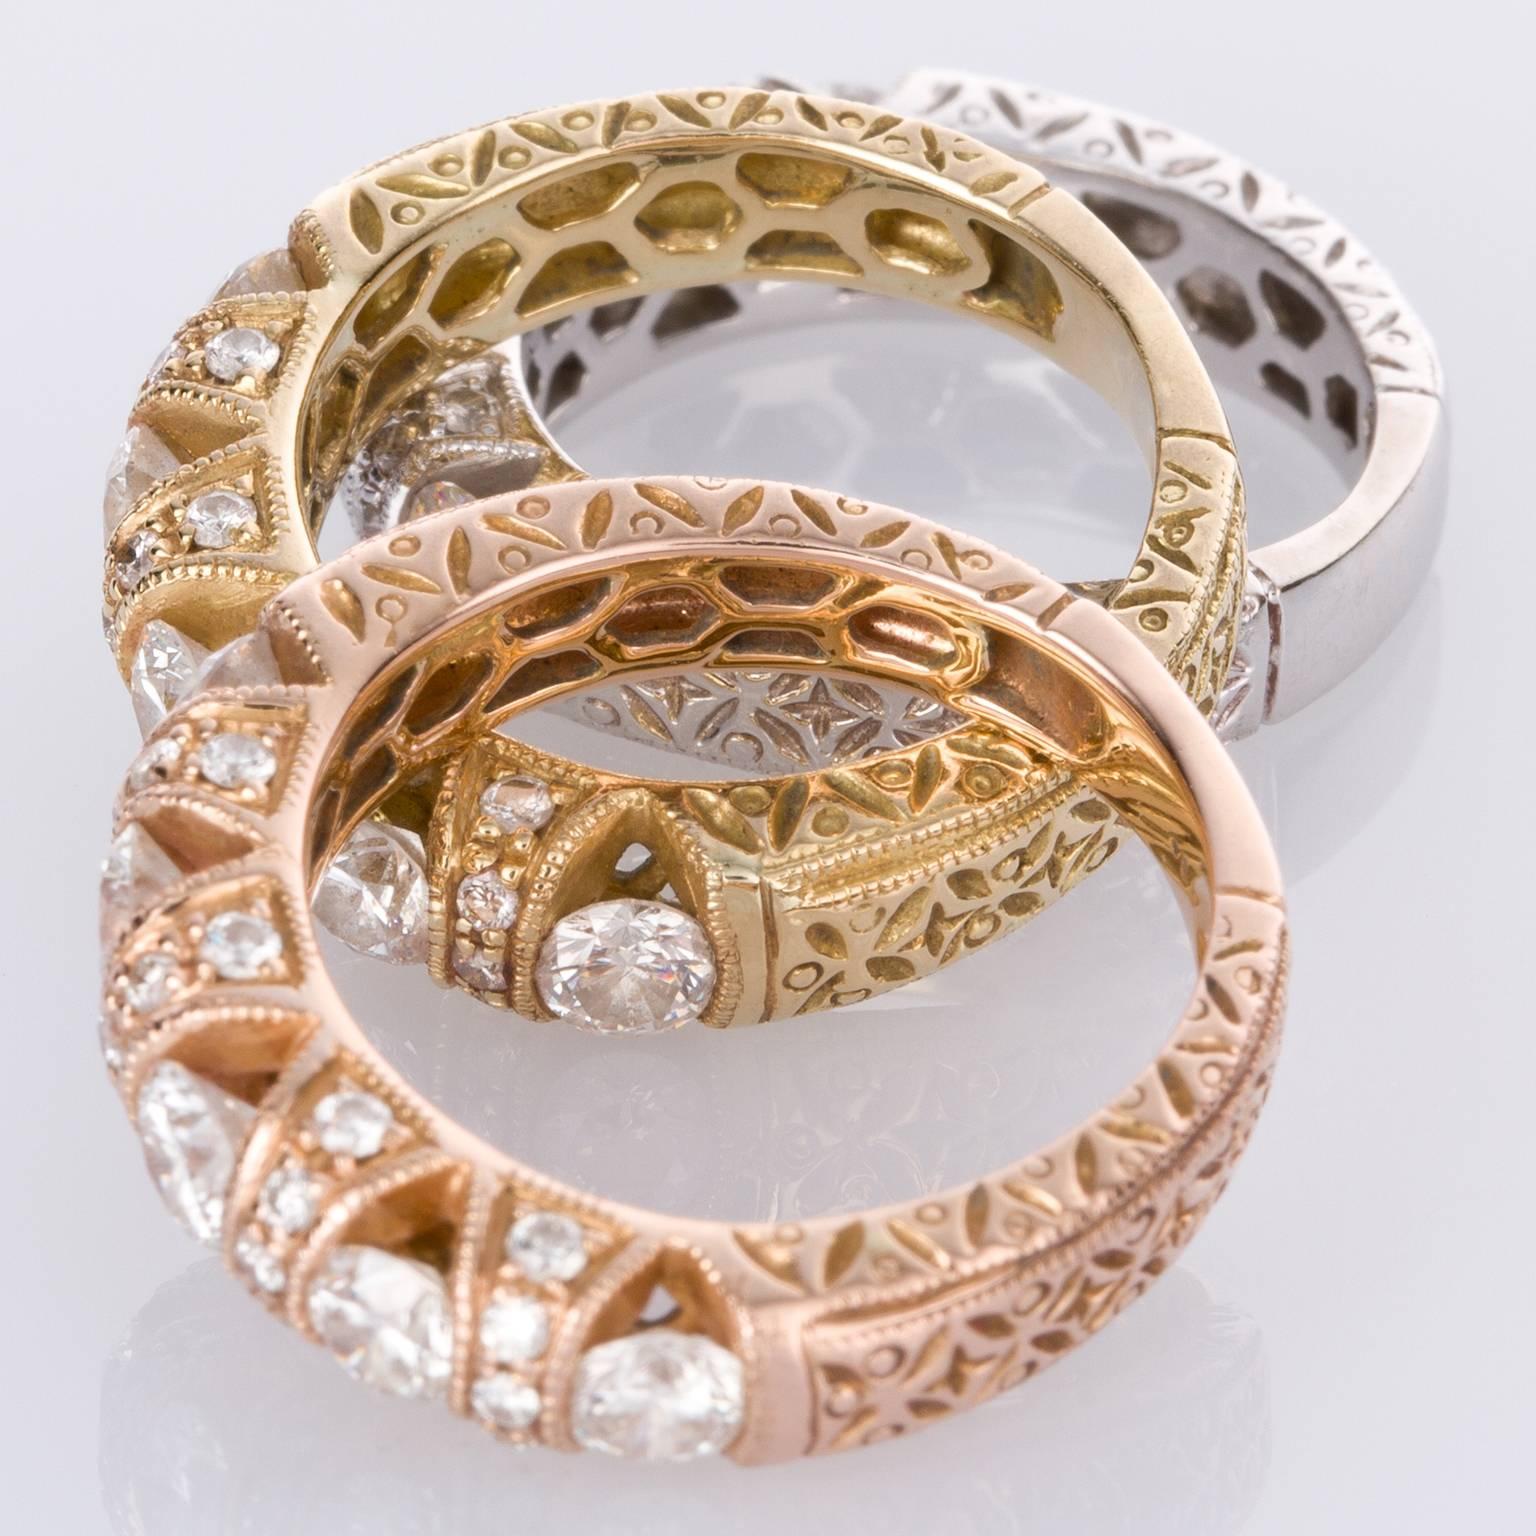 Looks great as a set of rings, but also individually these rings make a statement. A beautifully crafted 18k yellow gold eternity band with fine detailing including engraving down the shank, as well as diamonds set into the sides of the bands.